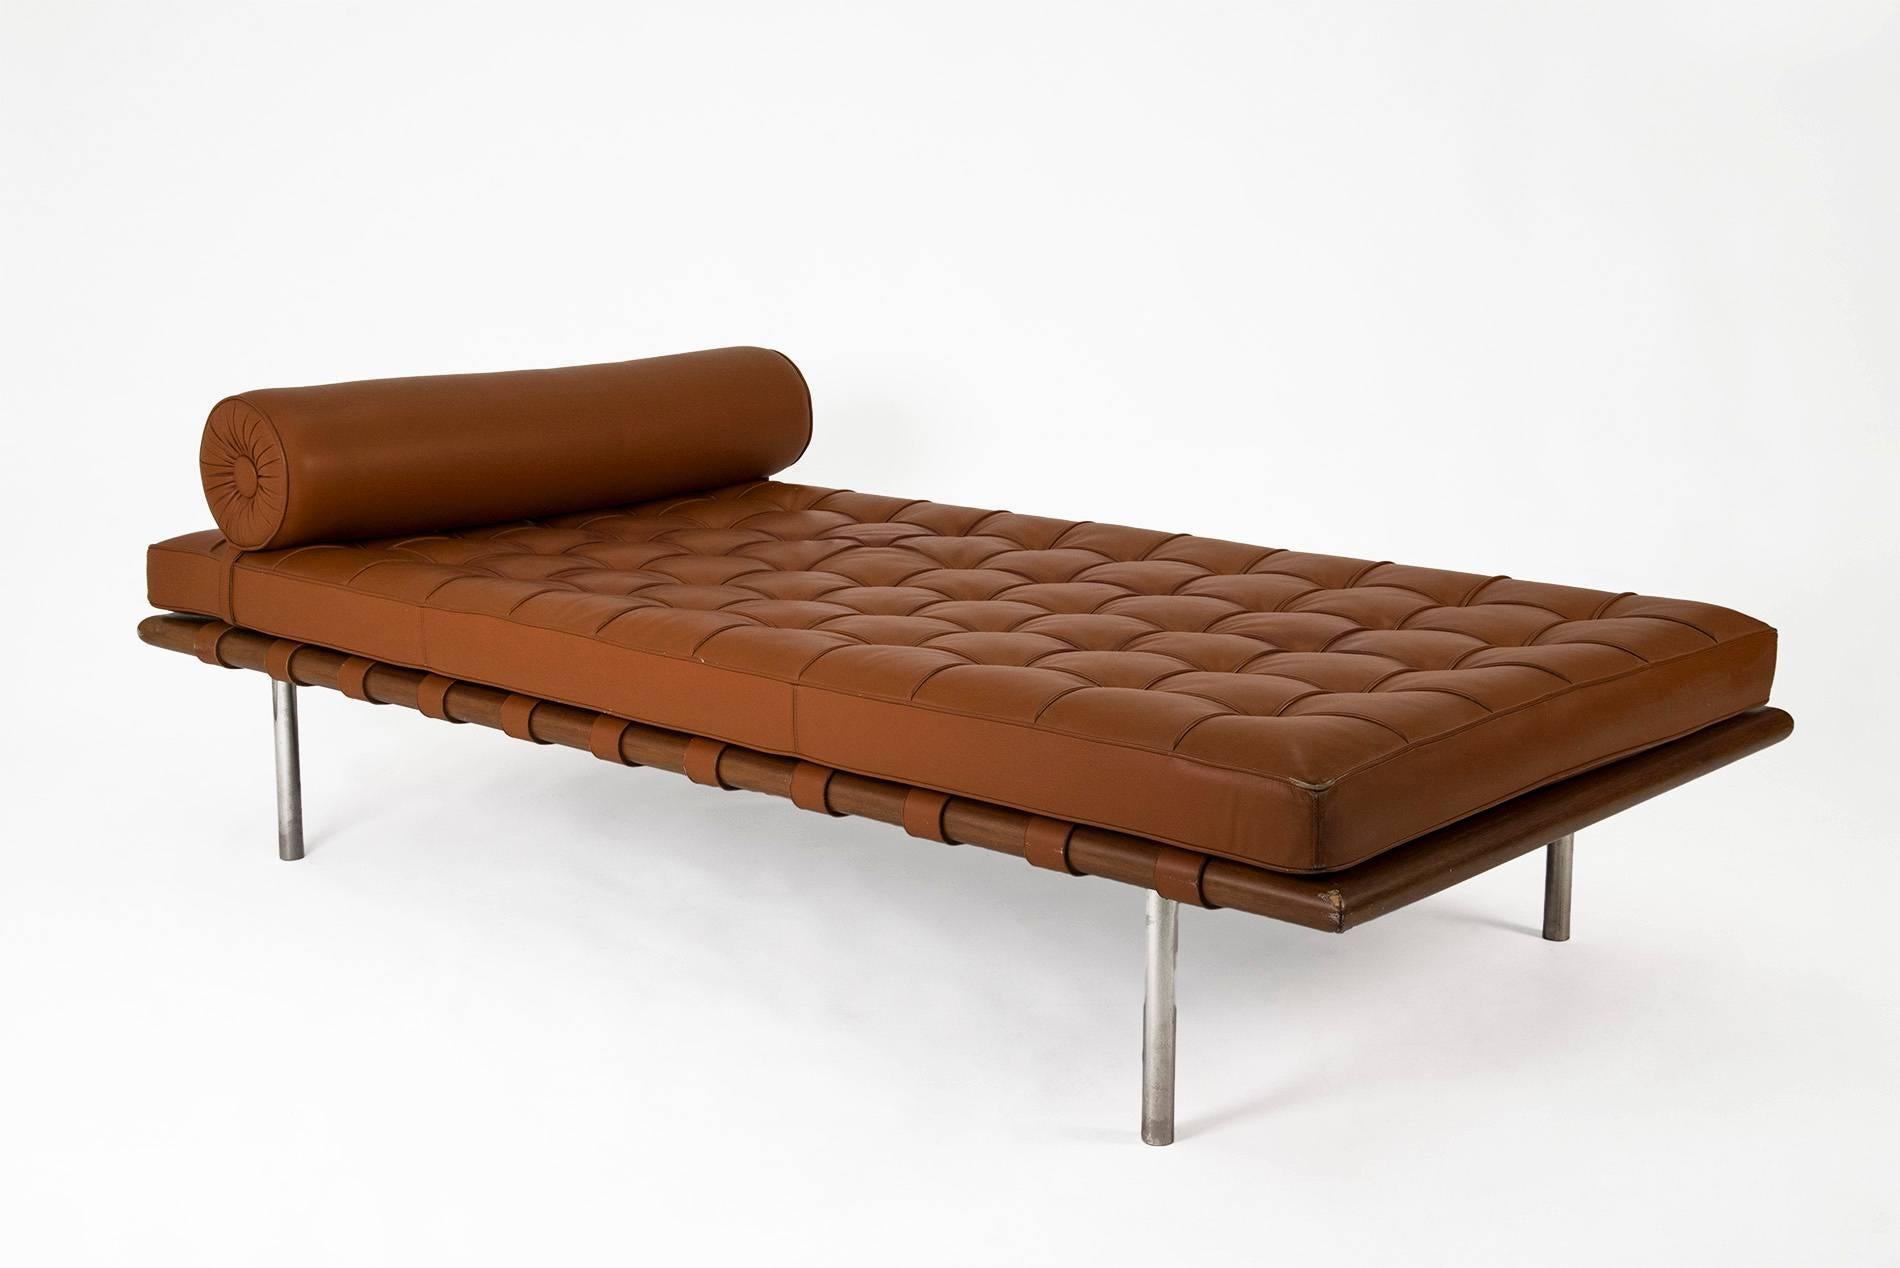 Iconic "Barcelona" daybed designed by Ludwig Mies van der Rohe for the  German Pavilion on the occasion of the 1929 International Exposition in Barcelona. It has been then manufactured by Knoll since 1953. This piece is covered with a